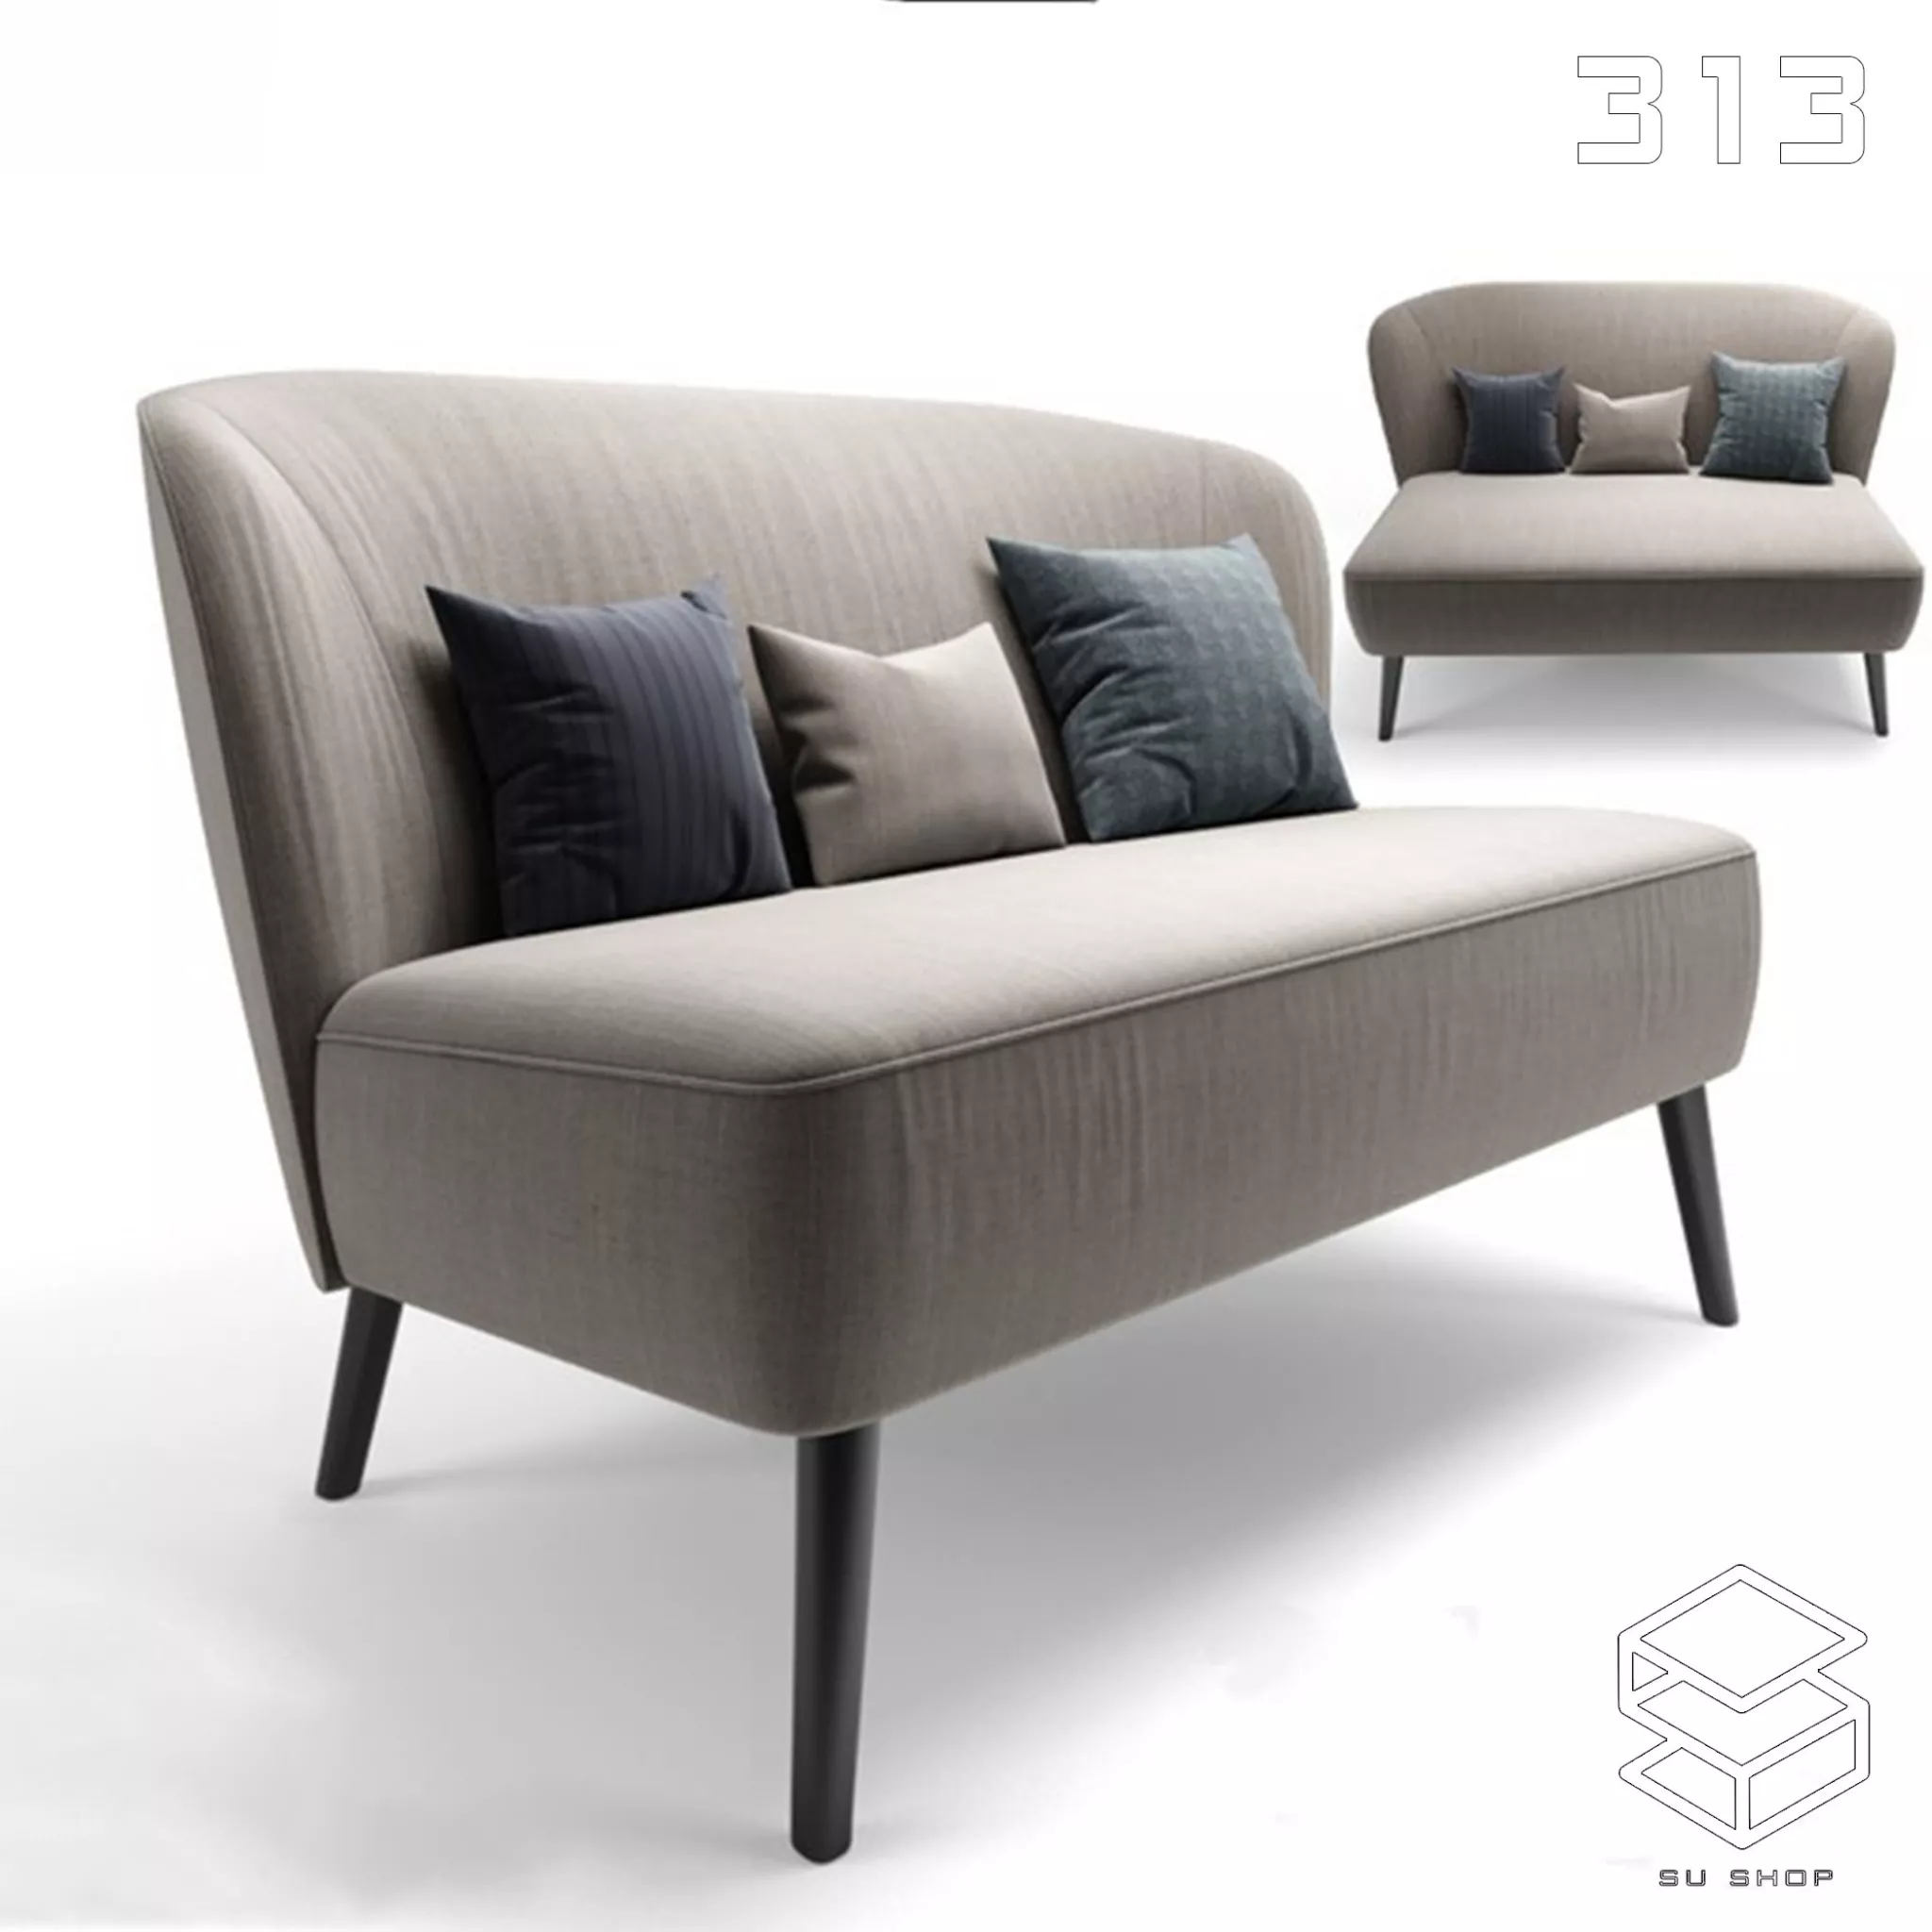 MODERN SOFA - SKETCHUP 3D MODEL - VRAY OR ENSCAPE - ID13623